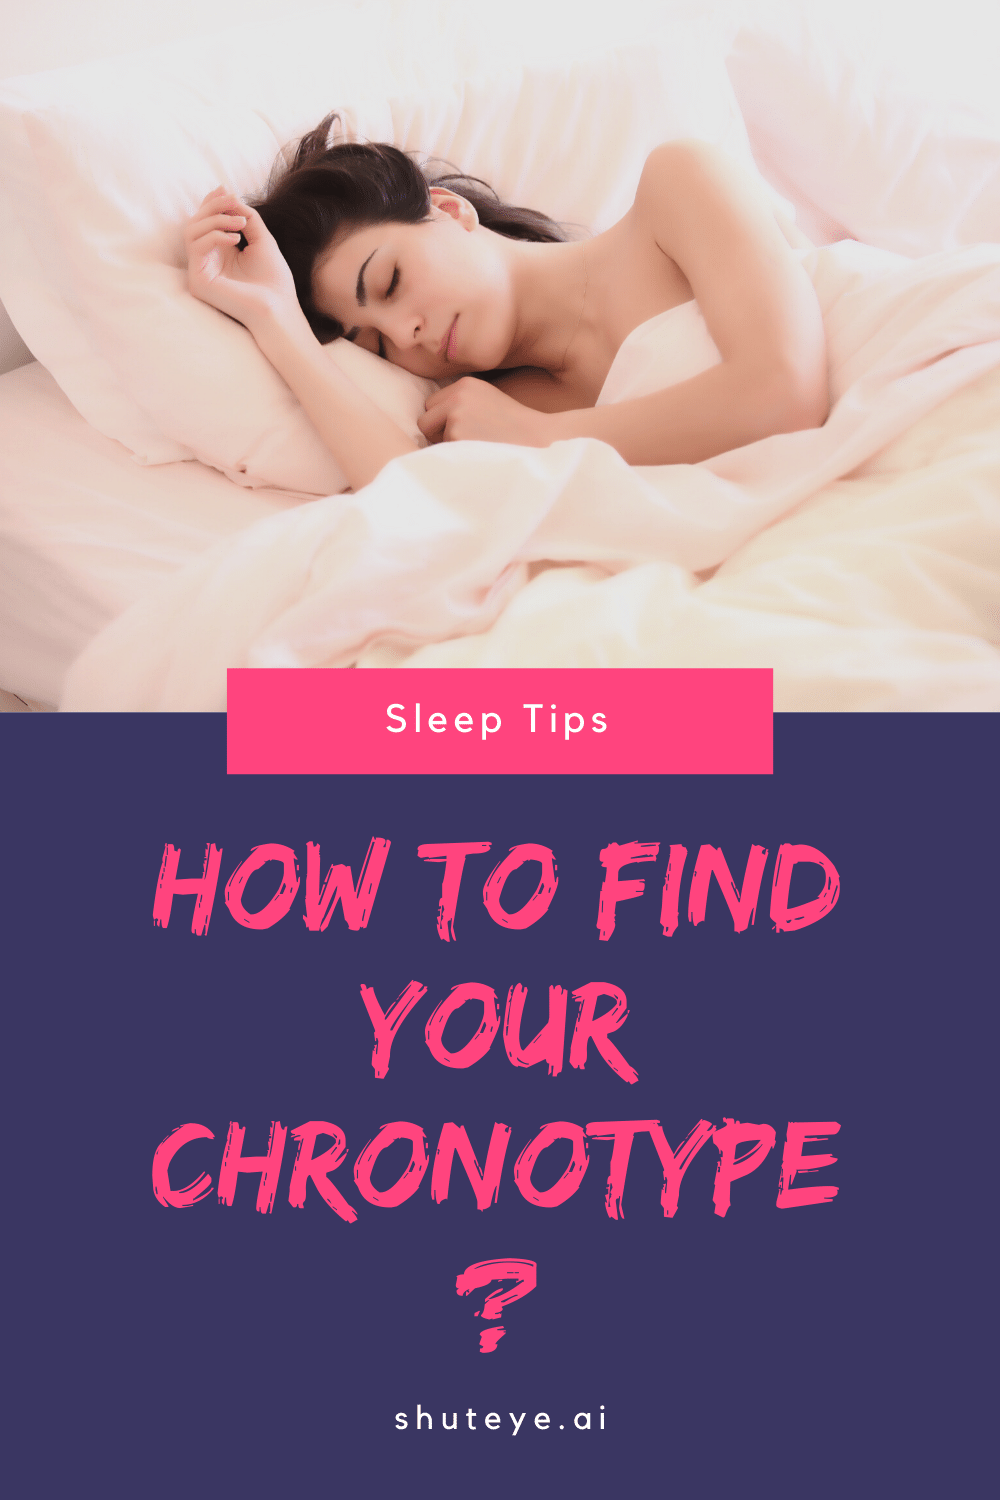 How to Find Your Chronotype and Improve Your Sleep?